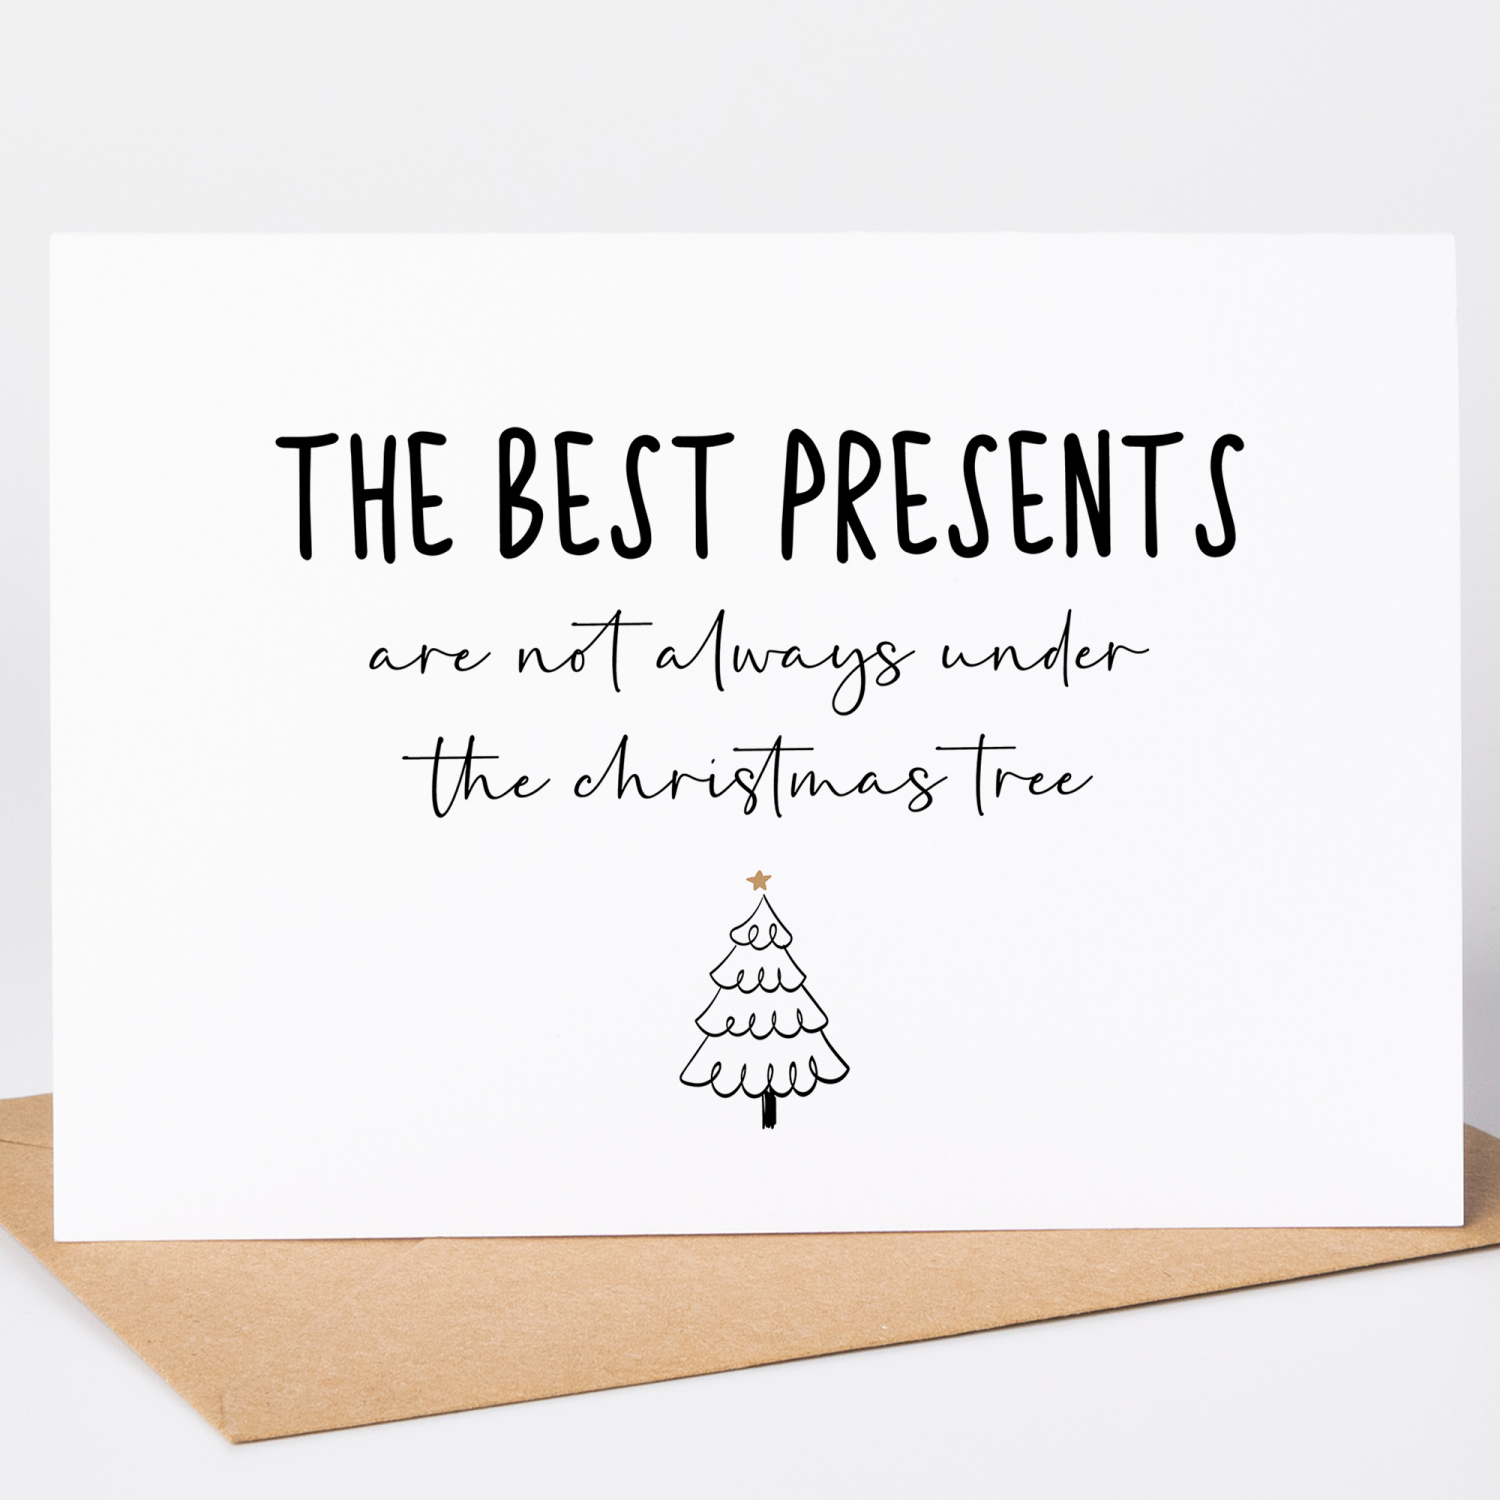 Christmas Pregnancy Announcement Card The Best Presents - A6 - 4.1" x 5.8"